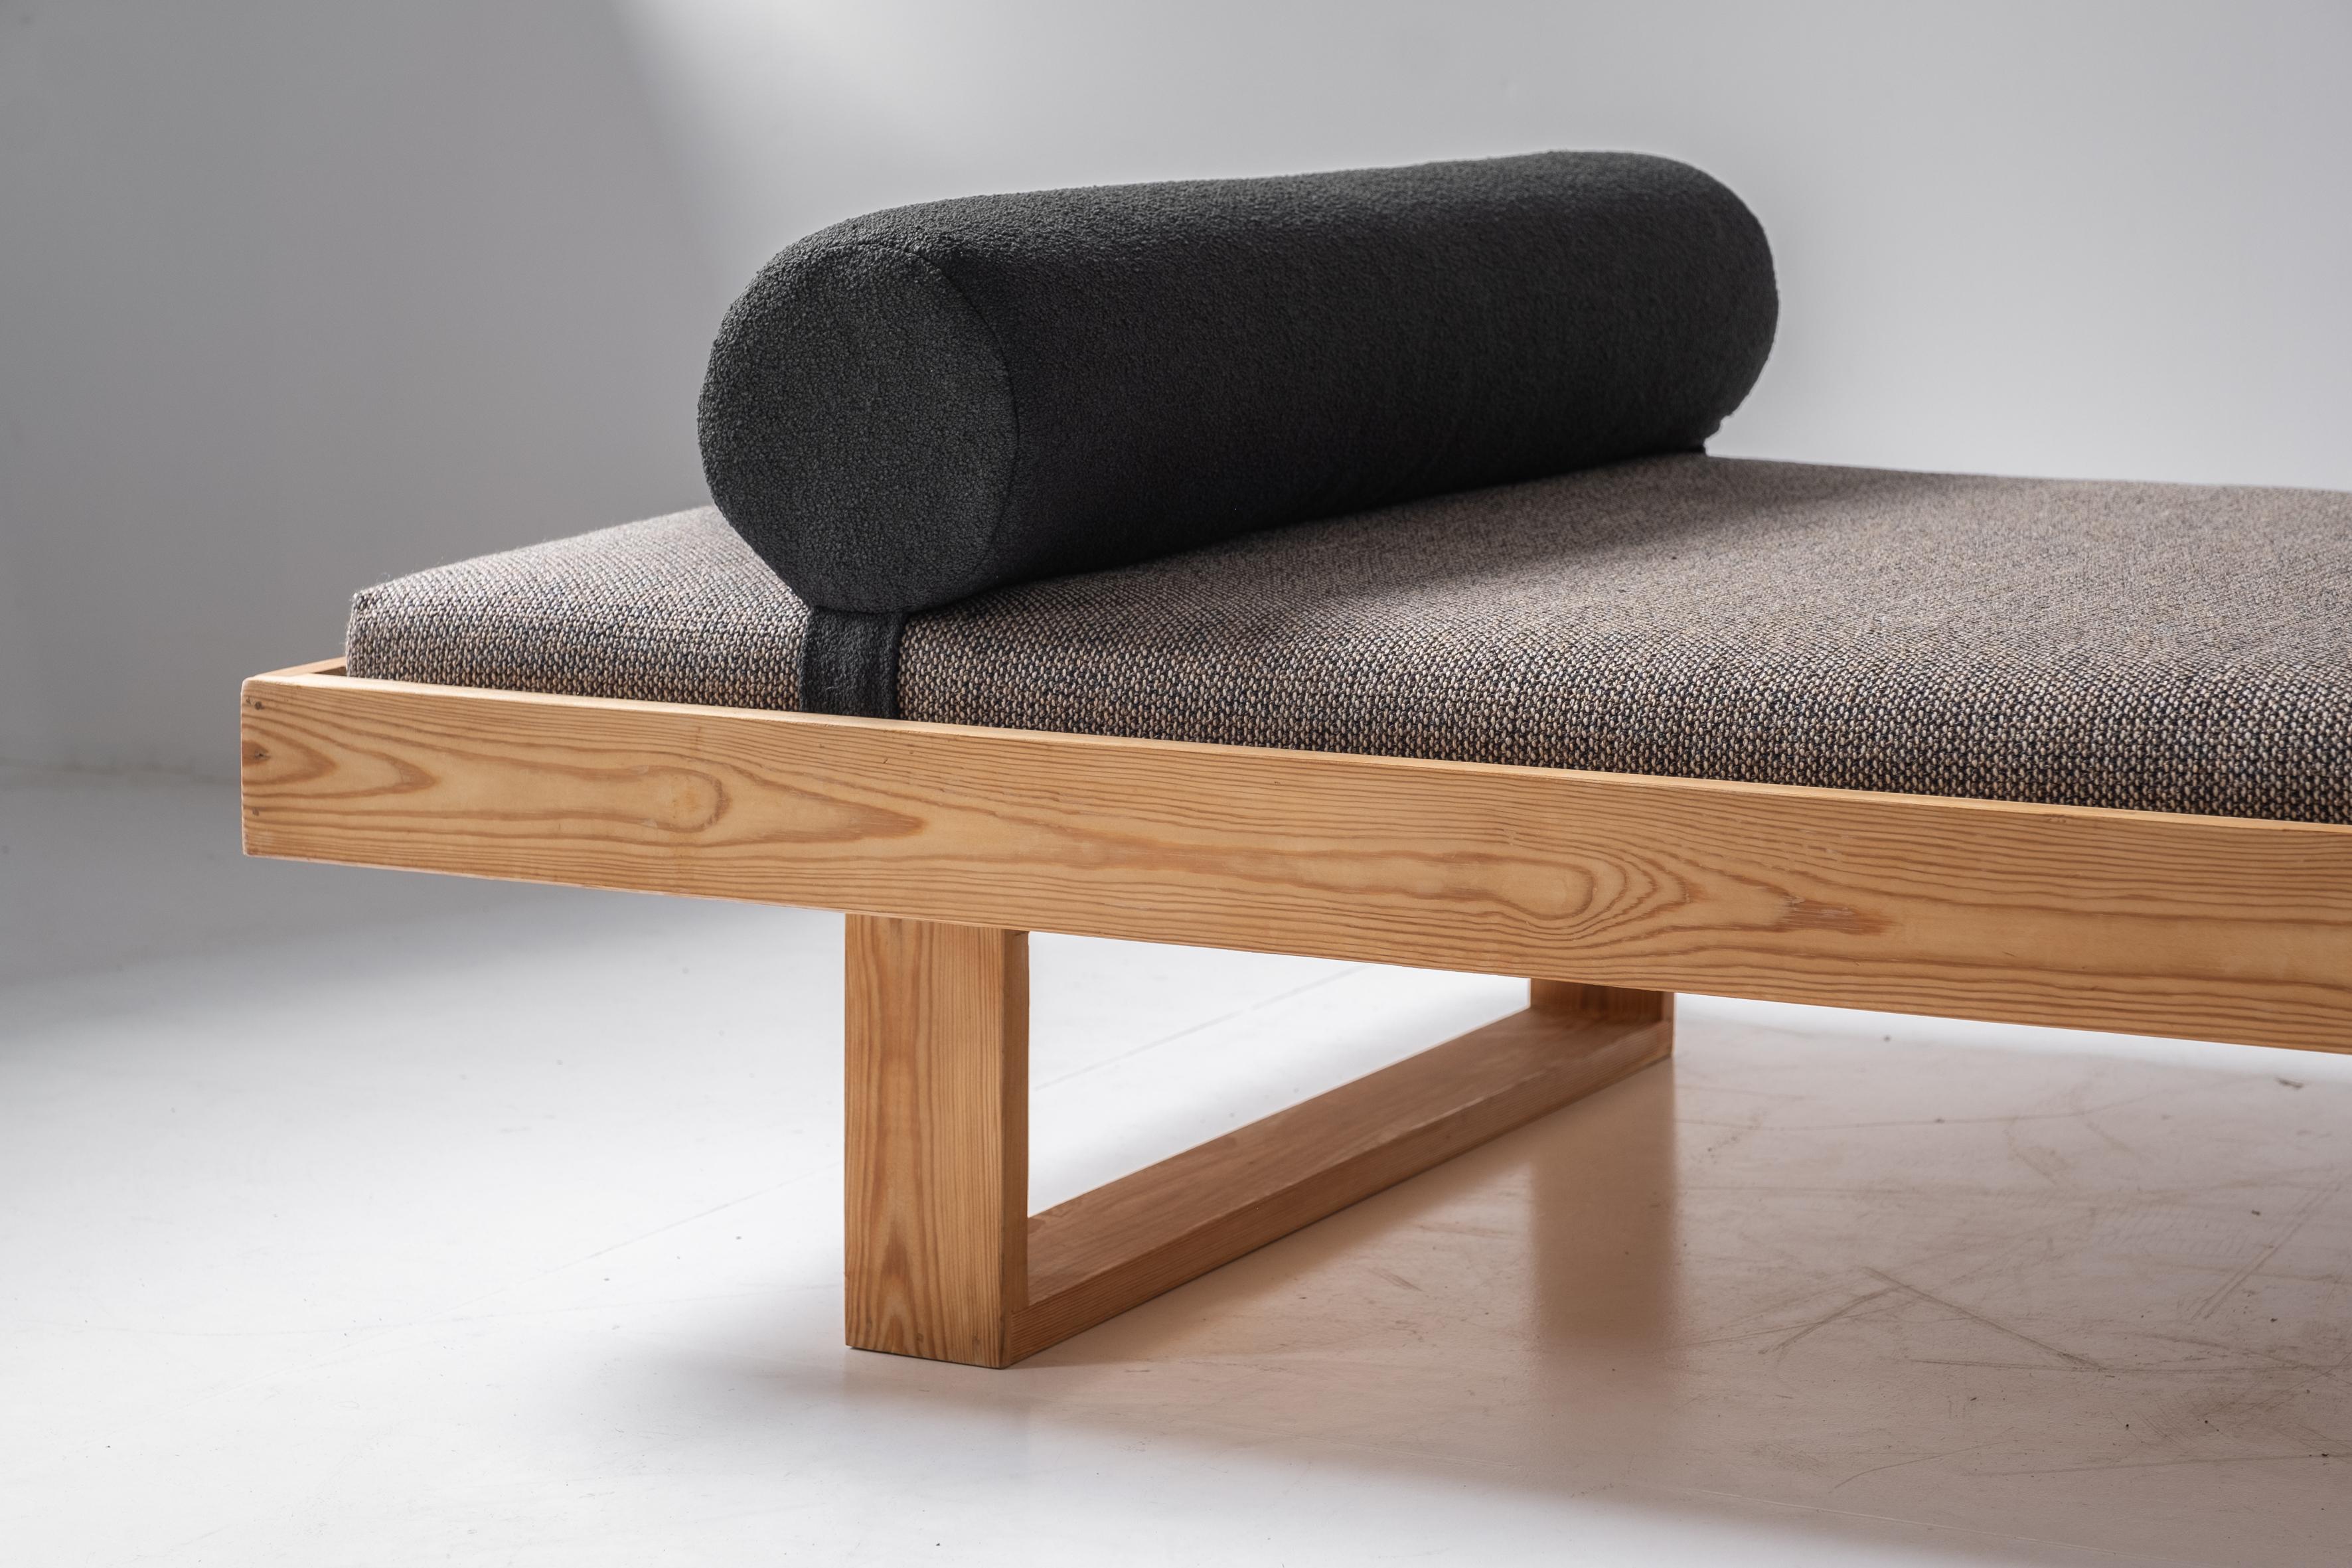 Fabric Daybed in pine from Denmark, dating from the 1960s.